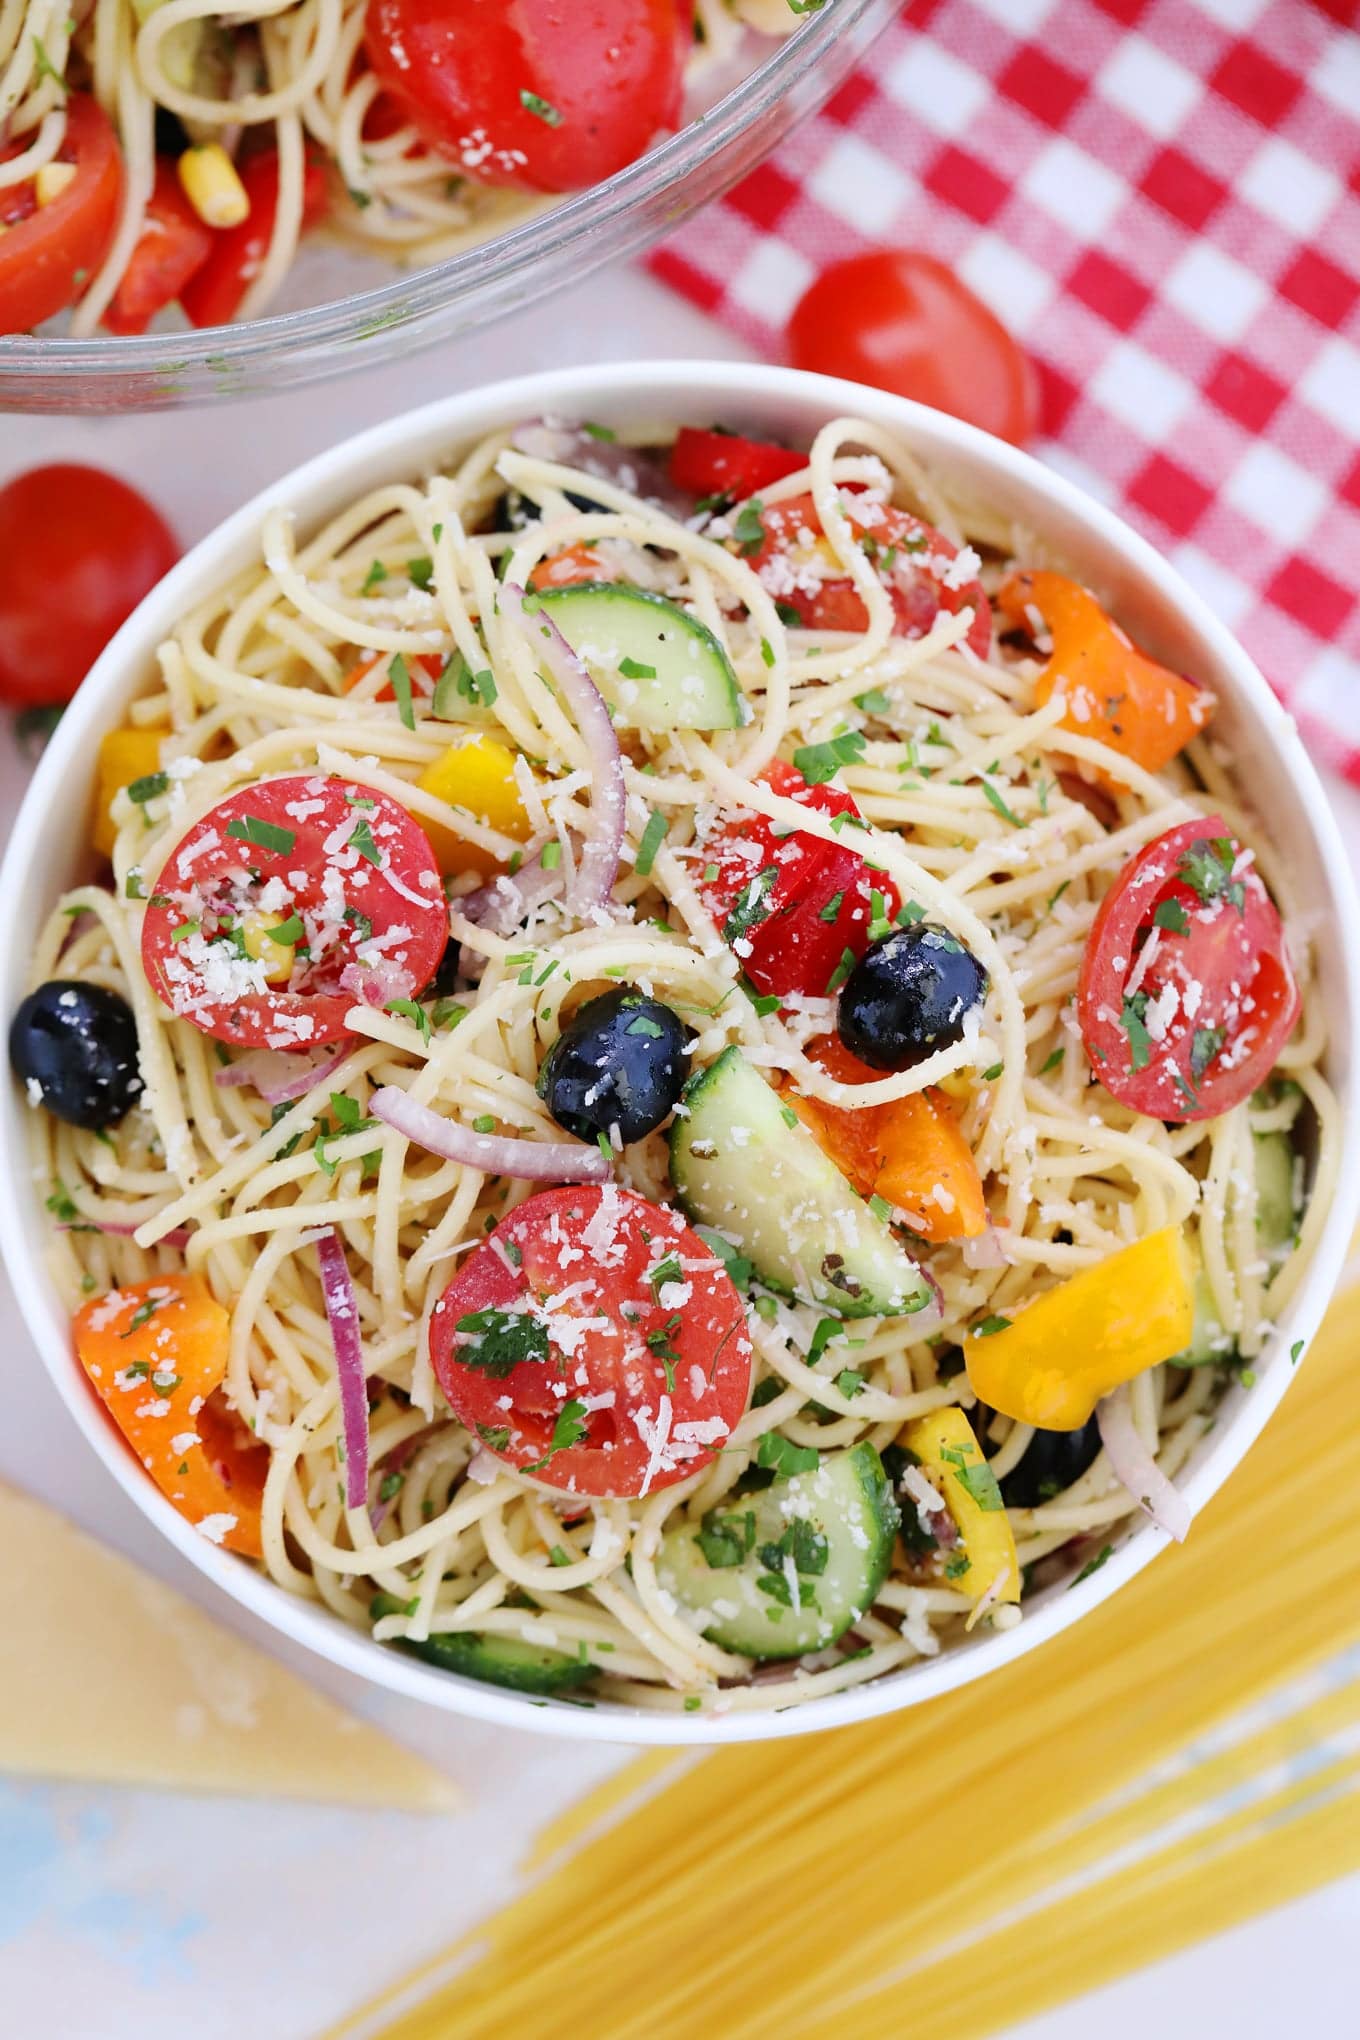 Cold Spaghetti Pasta Salad Recipe [video] - Sweet and Savory Meals